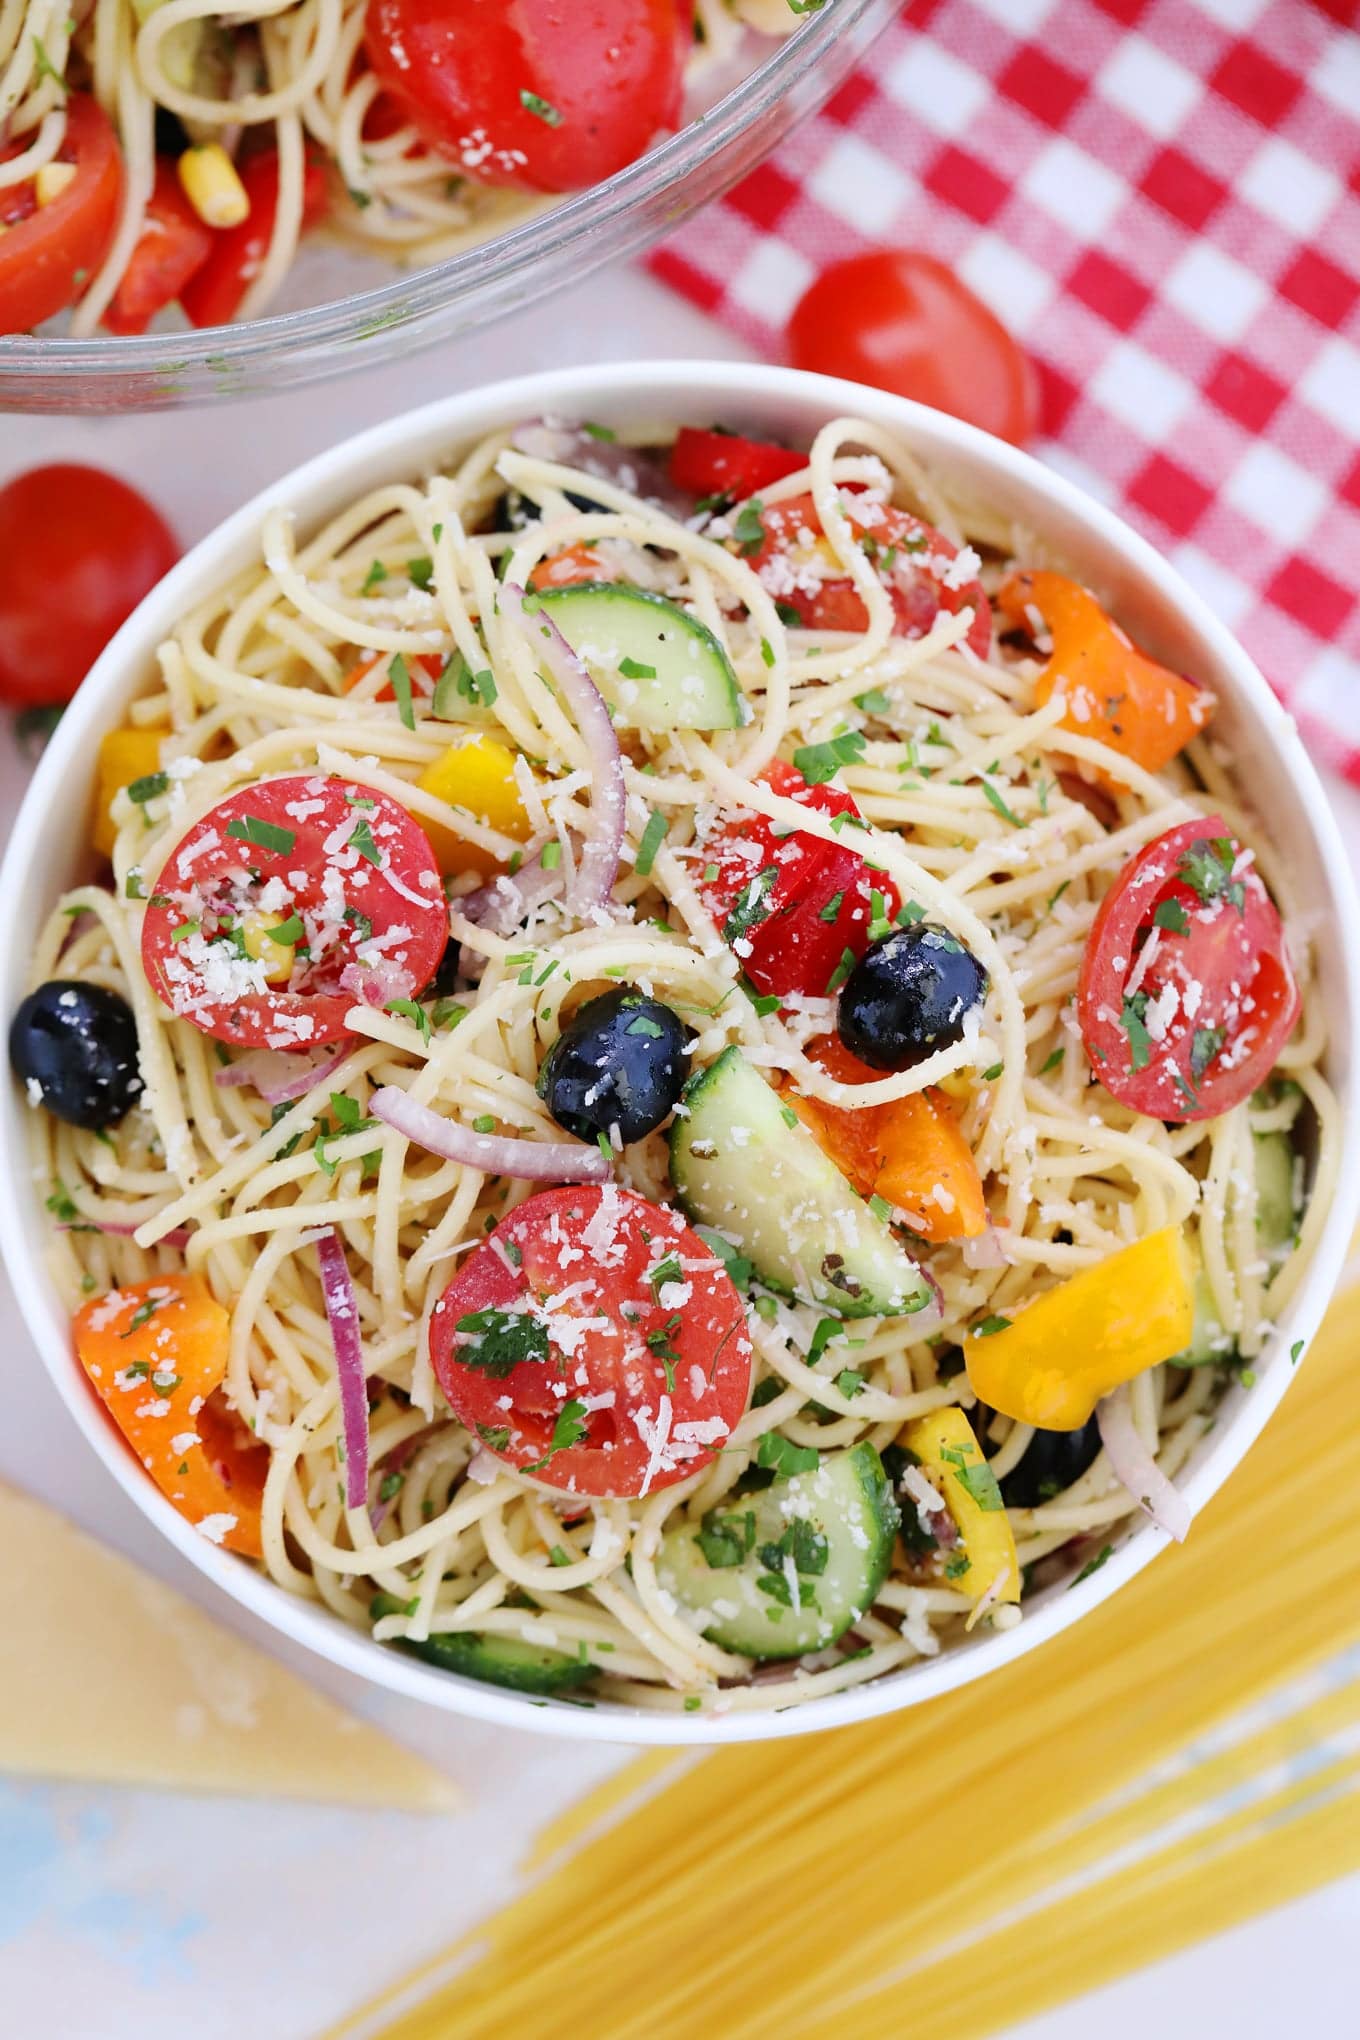 Cold Spaghetti Pasta Salad Recipe [video] - Sweet and Savory Meals